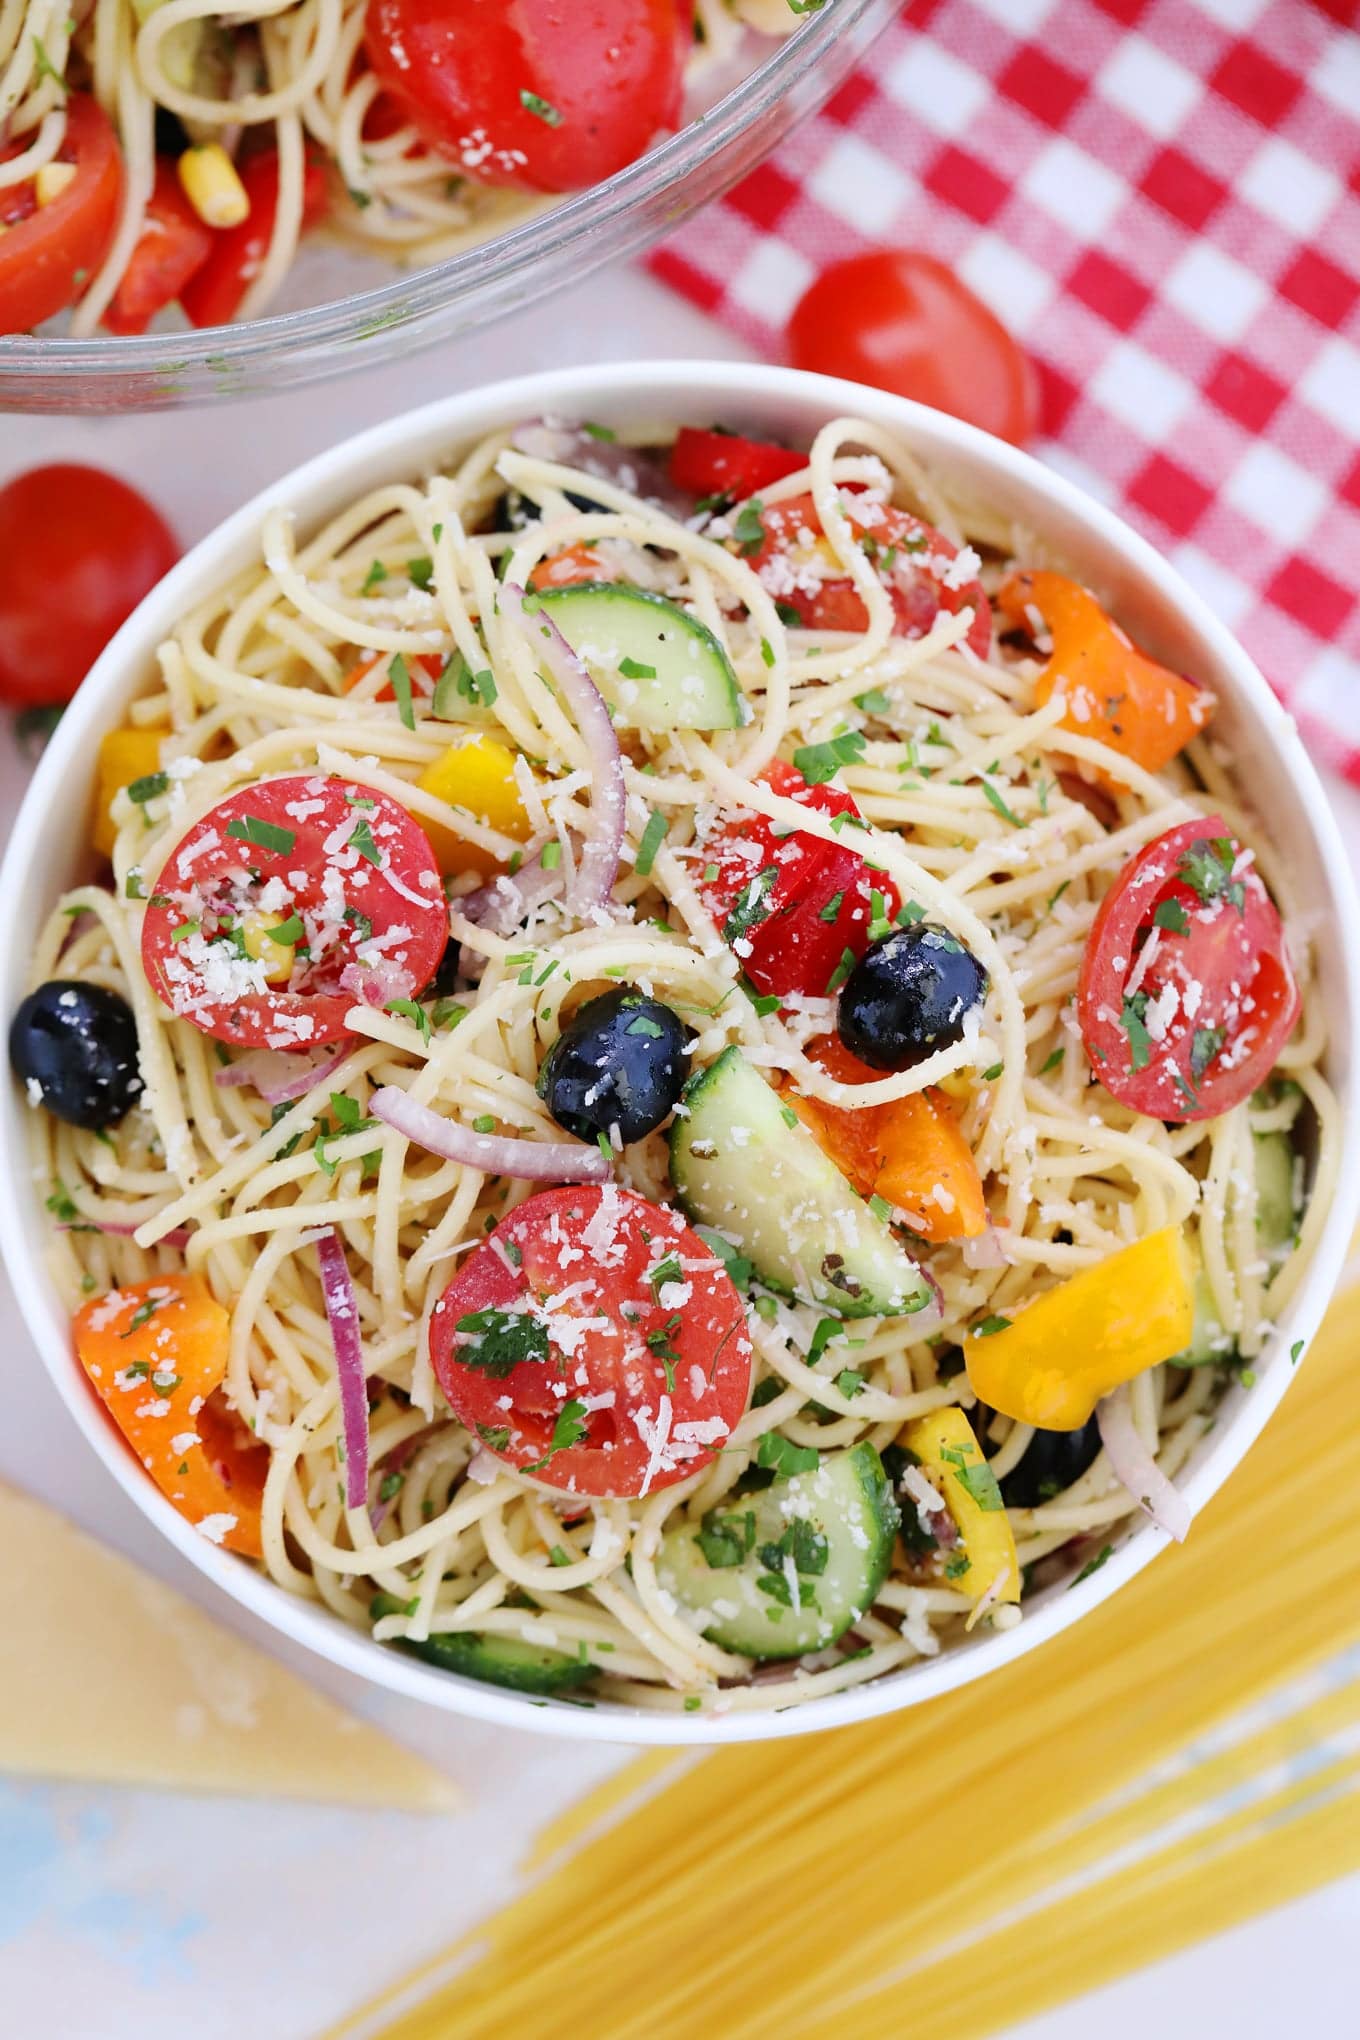 Cold Spaghetti Pasta Salad Recipe [video] - Sweet and Savory Meals